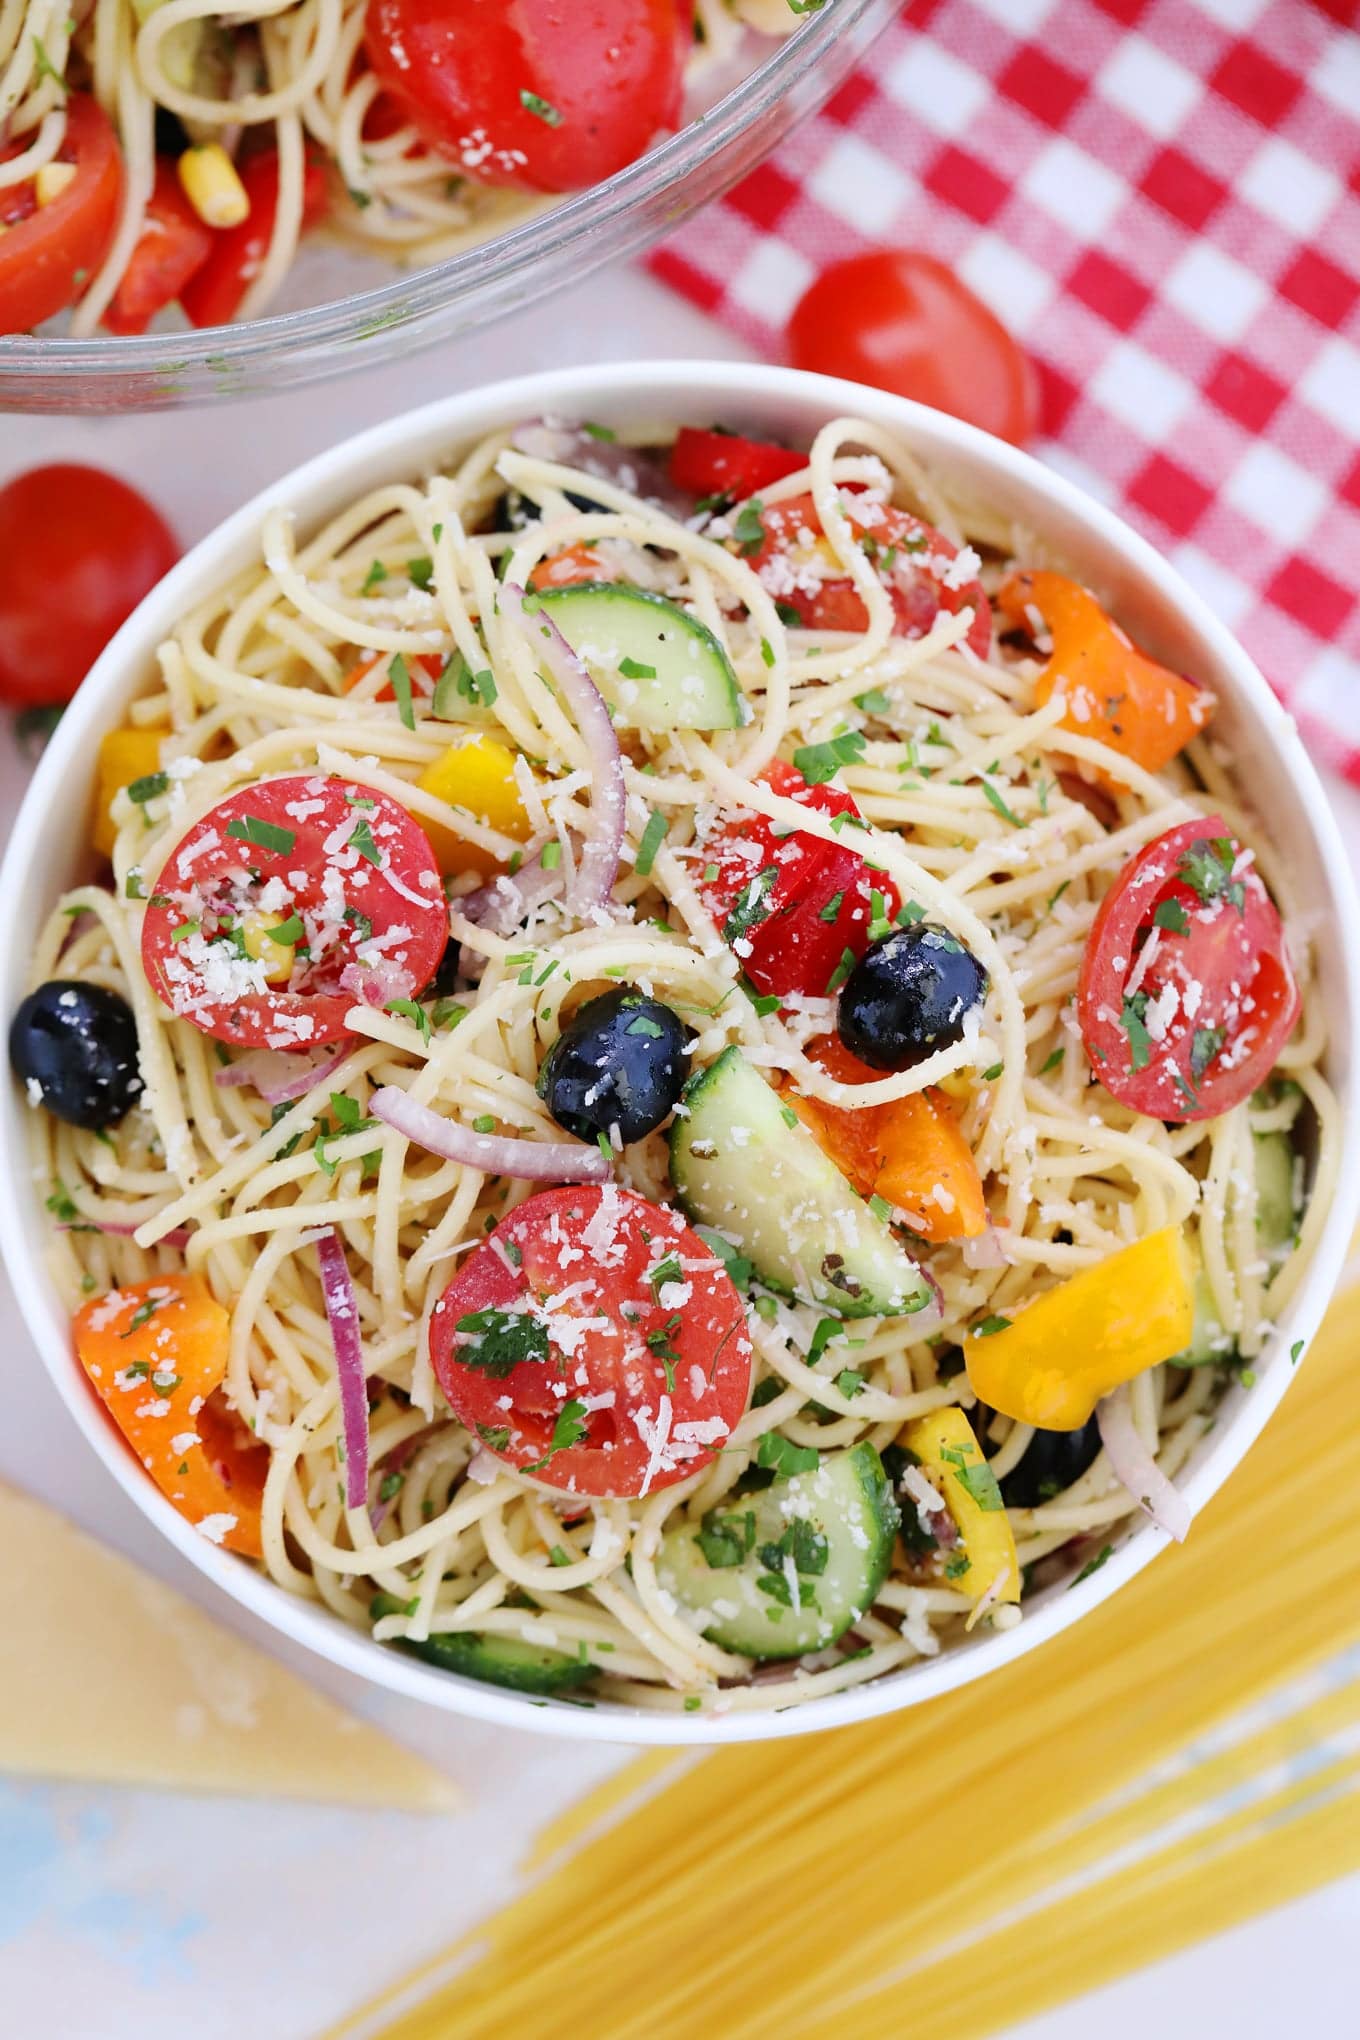 Cold Spaghetti Pasta Salad Recipe [video] - Sweet and Savory Meals